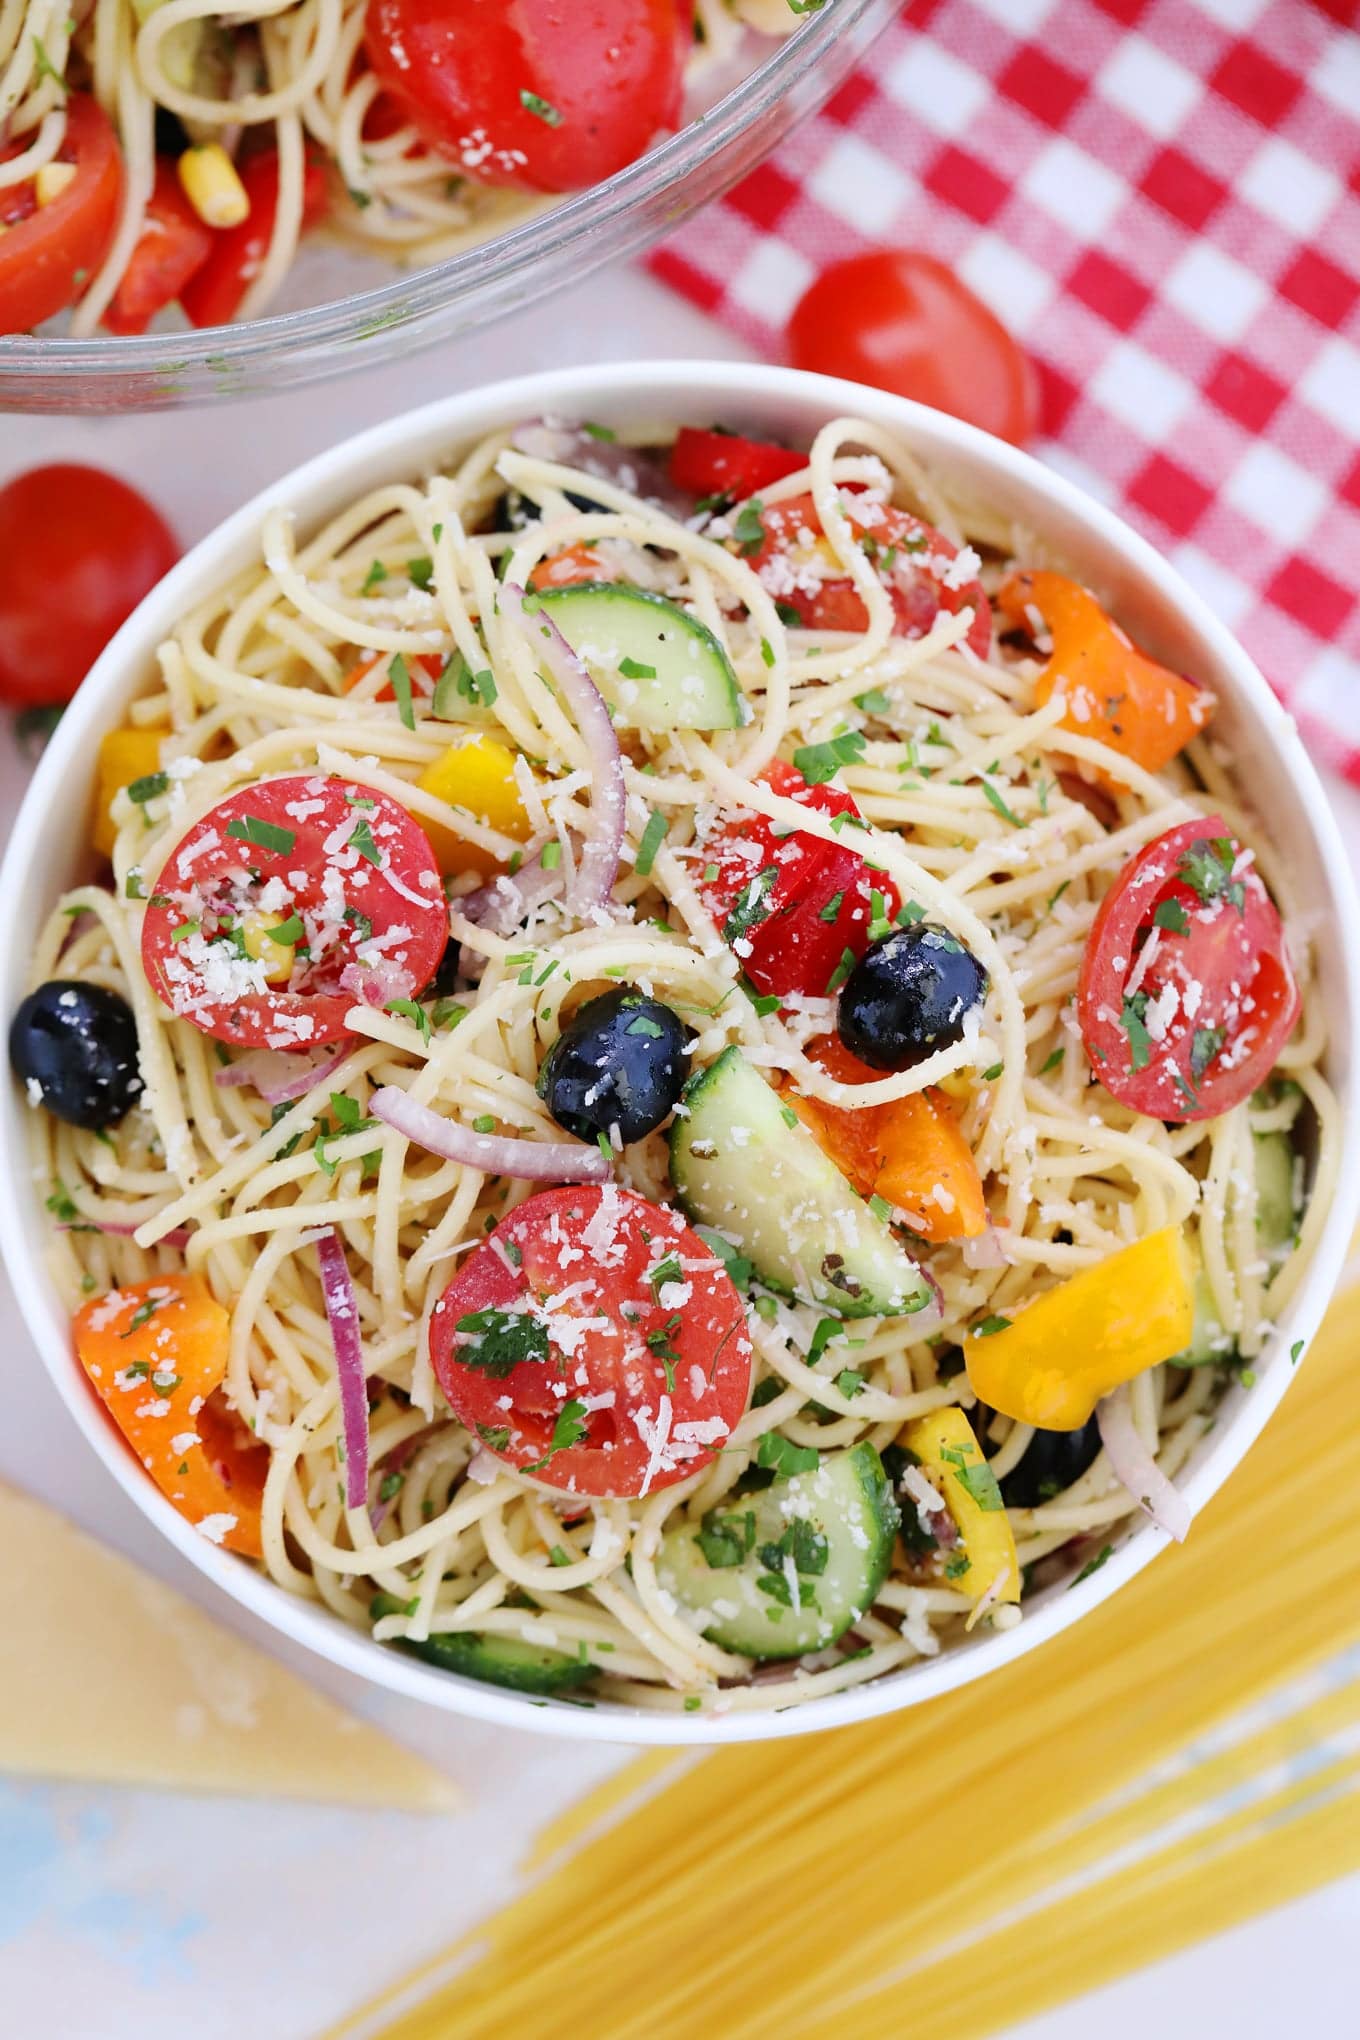 Cold Spaghetti Pasta Salad Recipe [video] - Sweet and Savory Meals